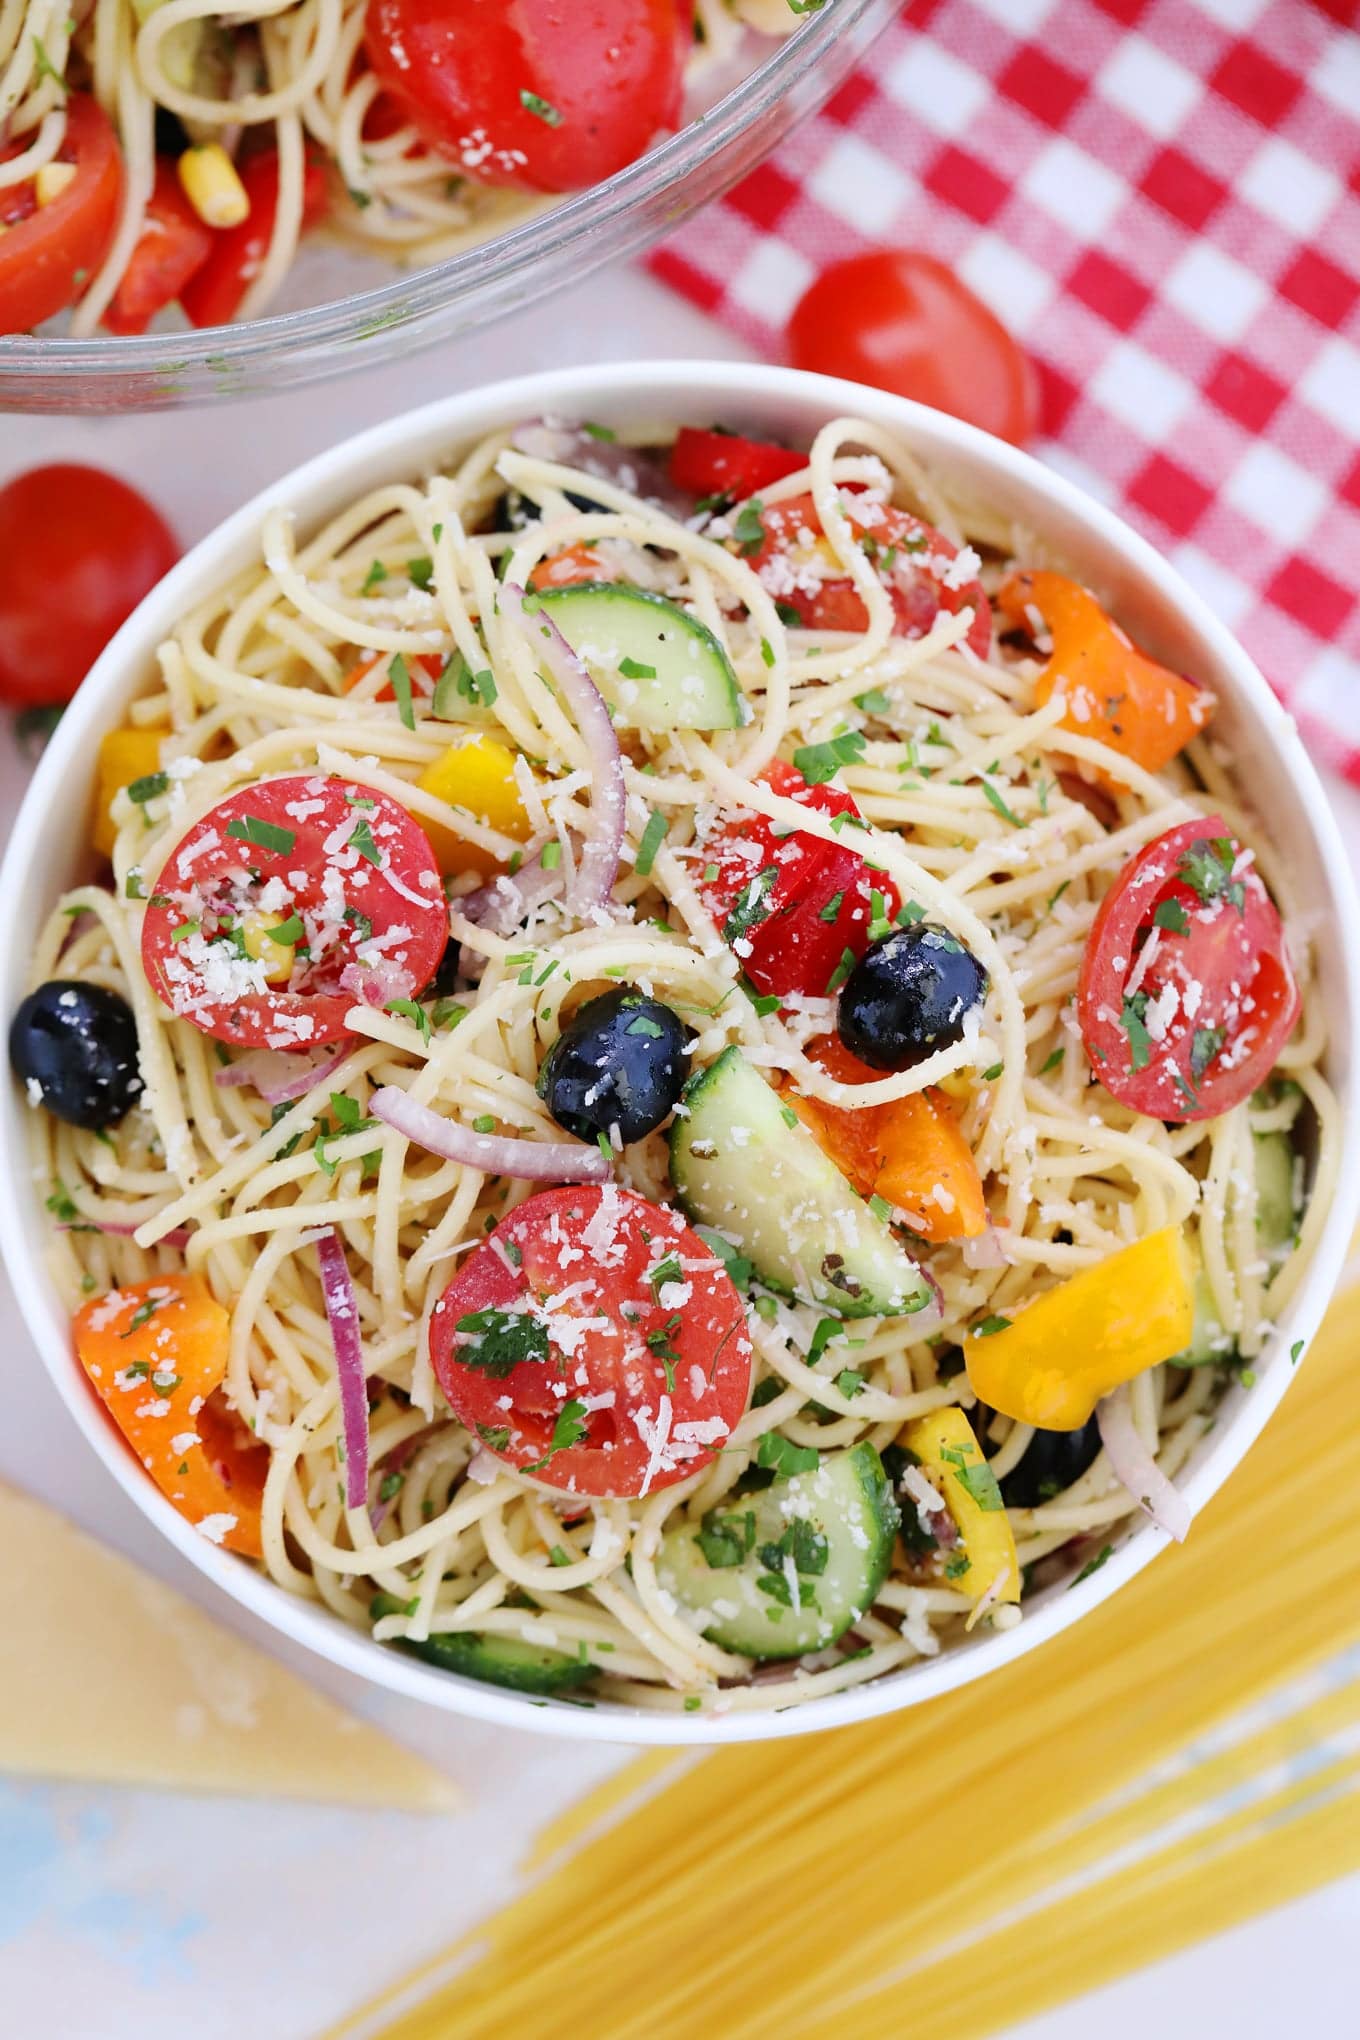 Cold Spaghetti Pasta Salad Recipe [video] - Sweet and Savory Meals